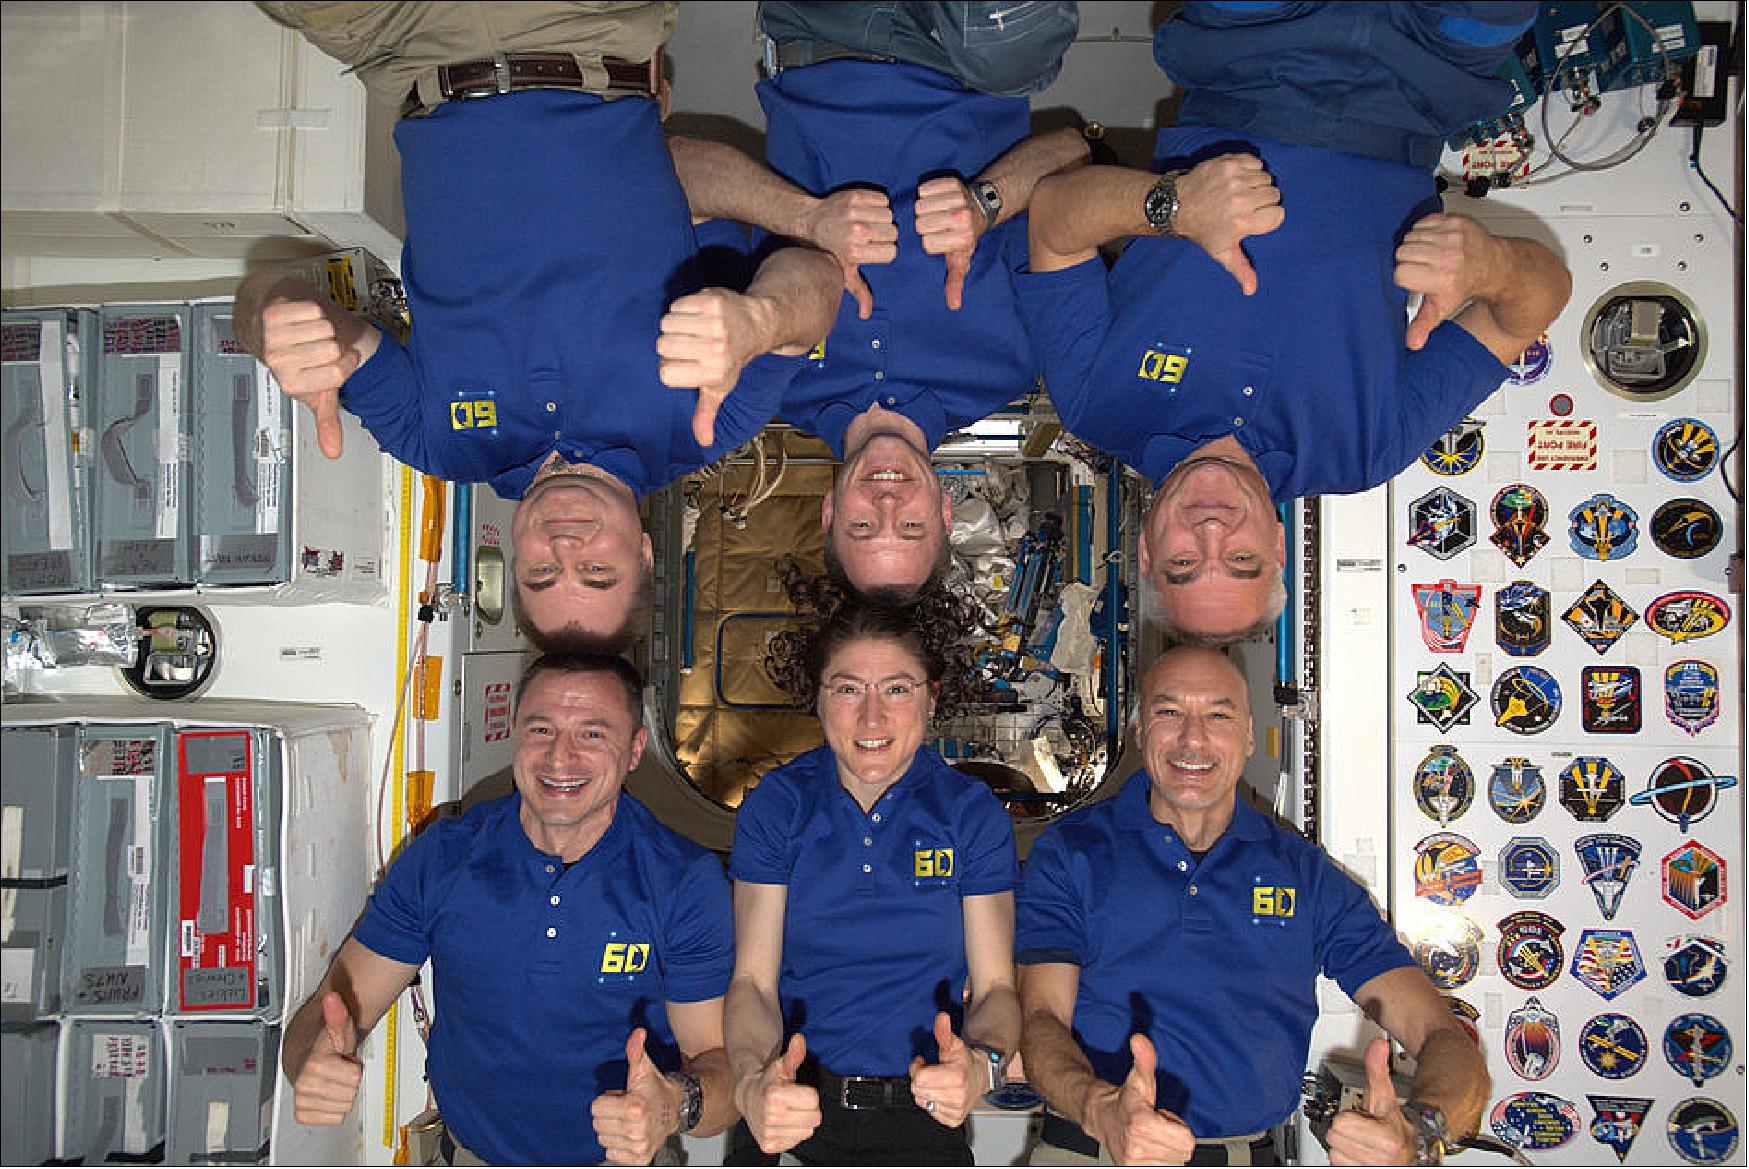 Figure 48: ESA astronaut Luca Parmitano and the rest of the International Space Station crew celebrated European Day of Languages (26 September) with the following message: "Six friends, three different languages: and all speak at least two of those. Today, we celebrate the ability to speak other languages and the European linguistic diversity, a rich heritage of our history." (image credit: ESA/NASA)